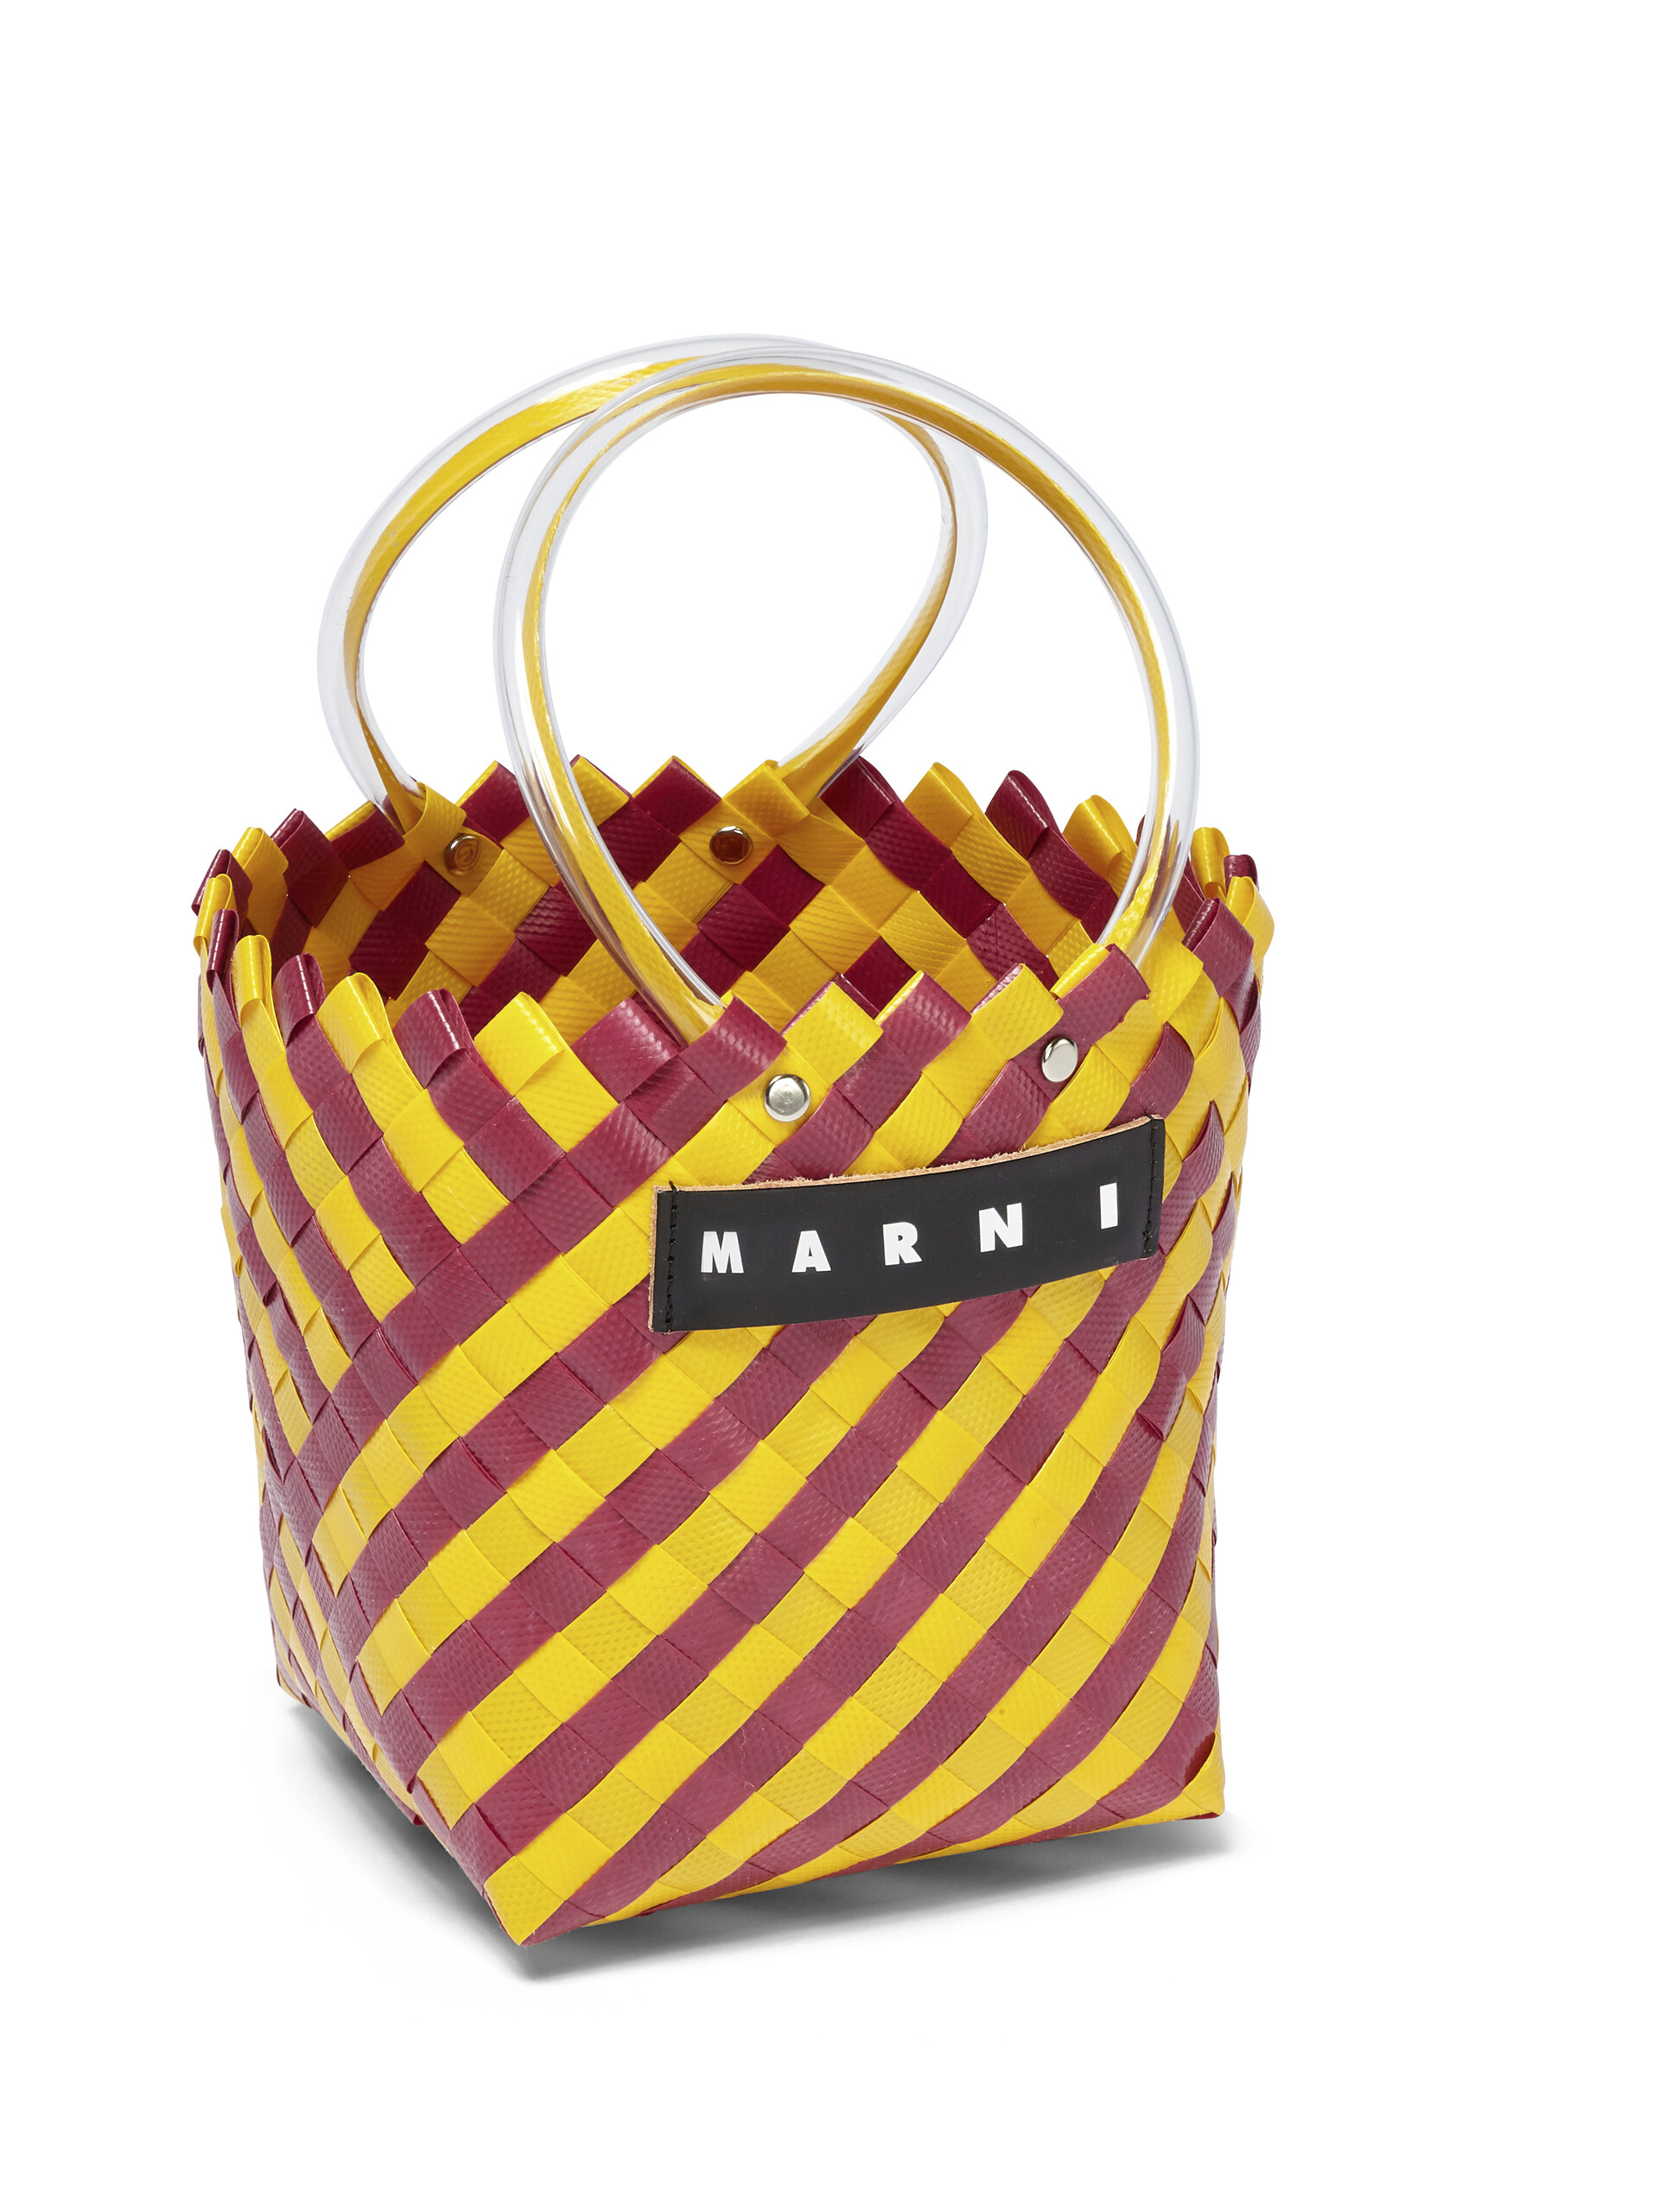 MARNI MARKET bag in yellow and burgundy woven material - Bags - Image 4